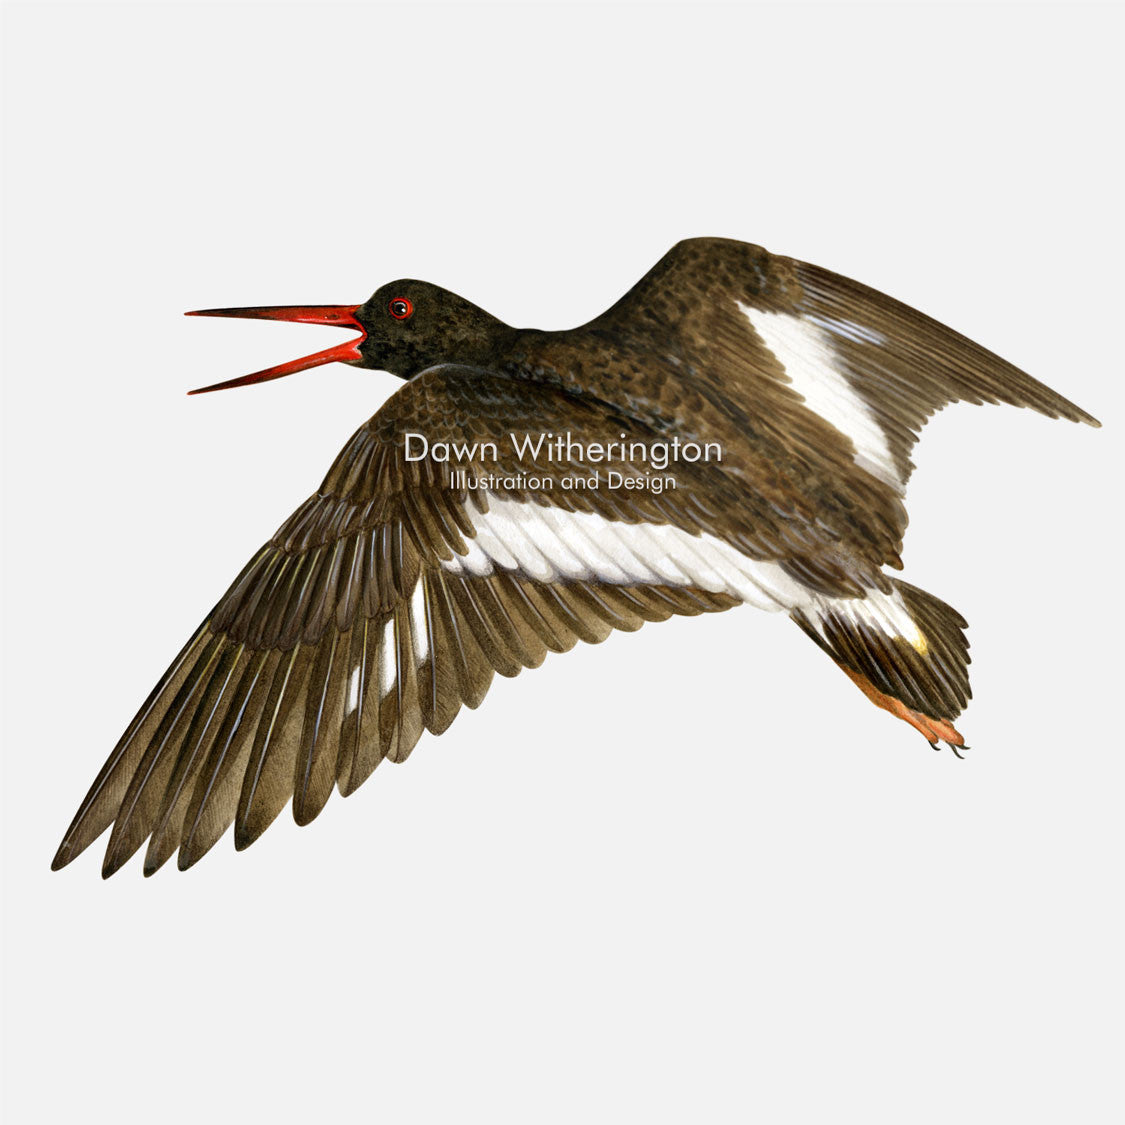 This beautiful illustration of an American oystercatcher, Haematopus palliatus, is biologically accurate in detail..